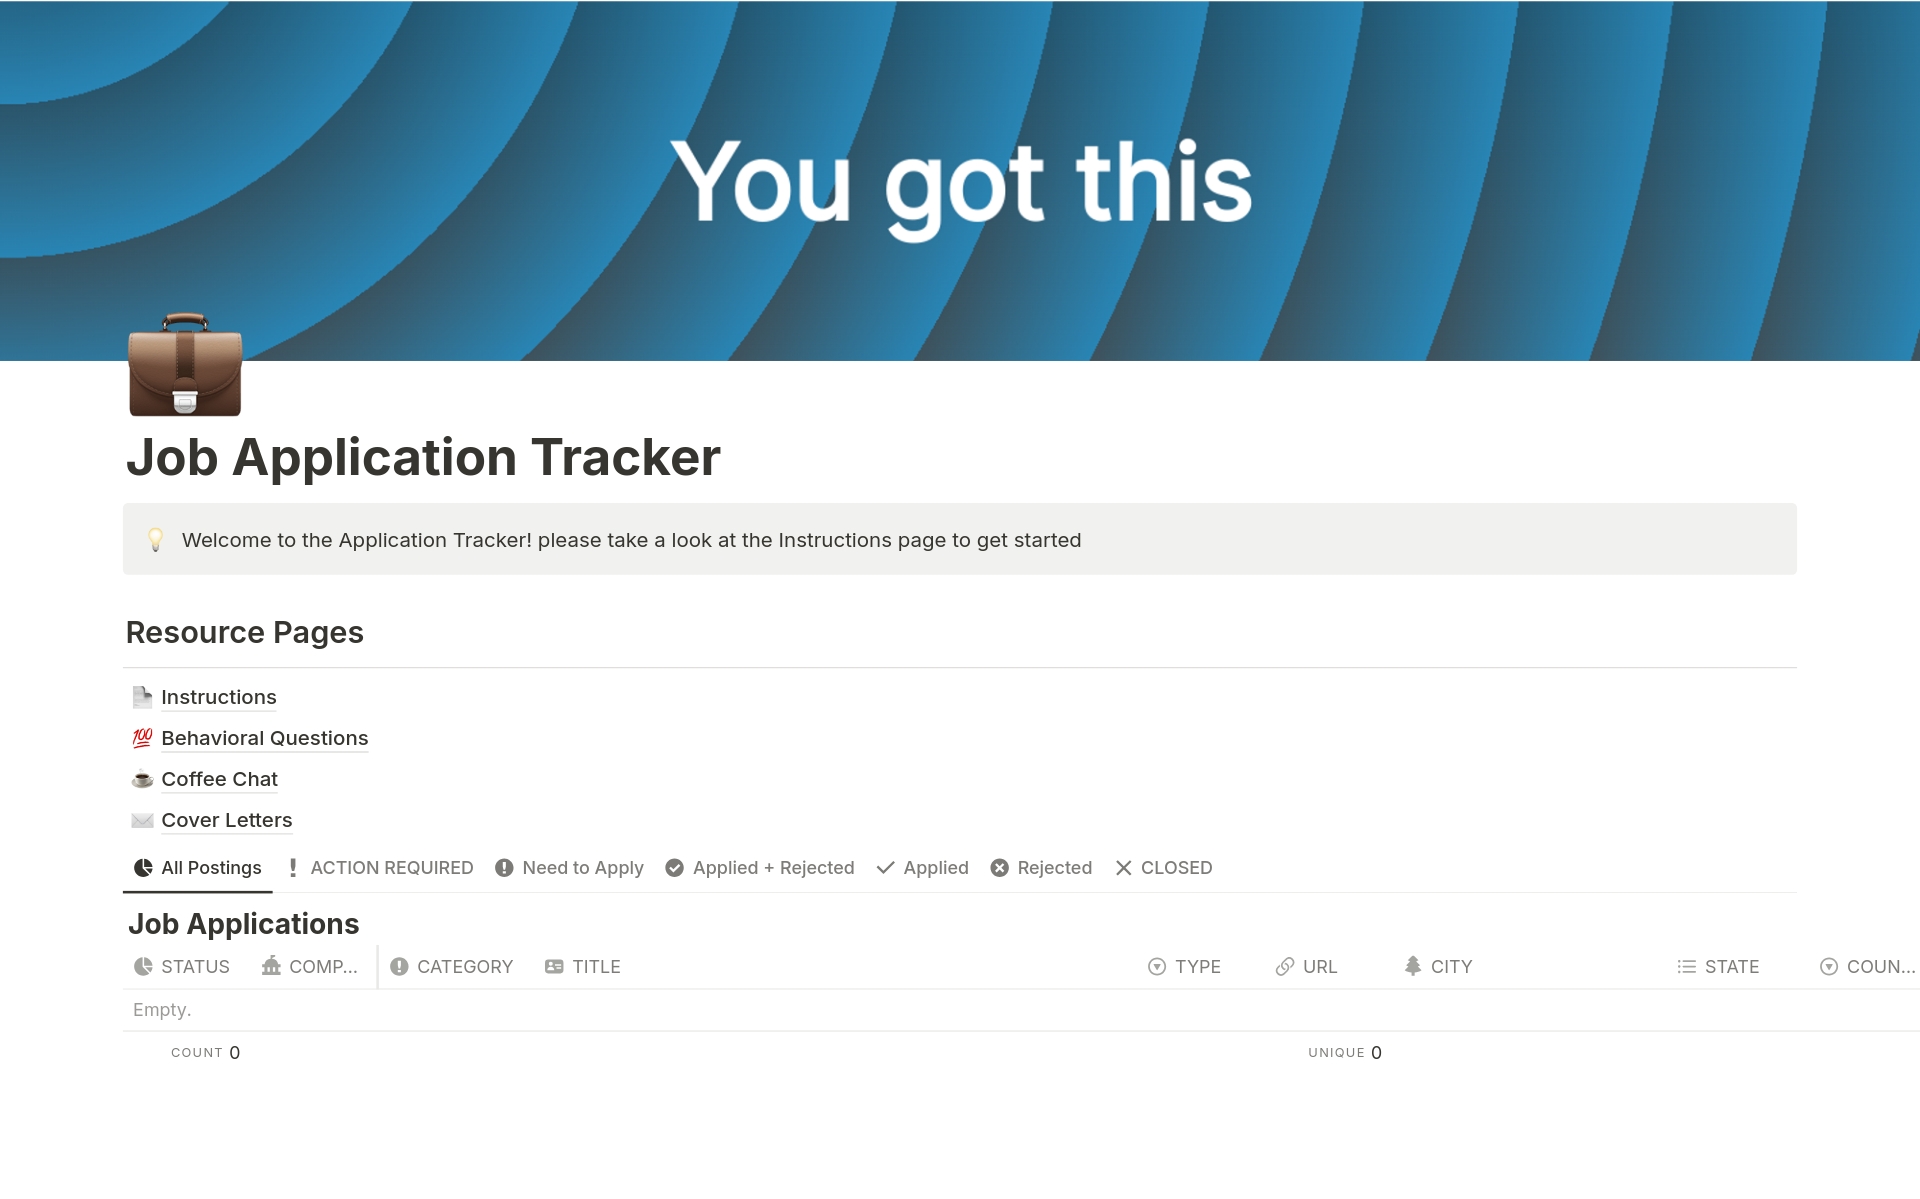 This Notion Job Application Tracker is a way to organize your job applications, collect the data, and visualize the metrics. Along with this Notion Template, I have also developed a program to help visualize your progres! (Instructions for the program are found in the template)
